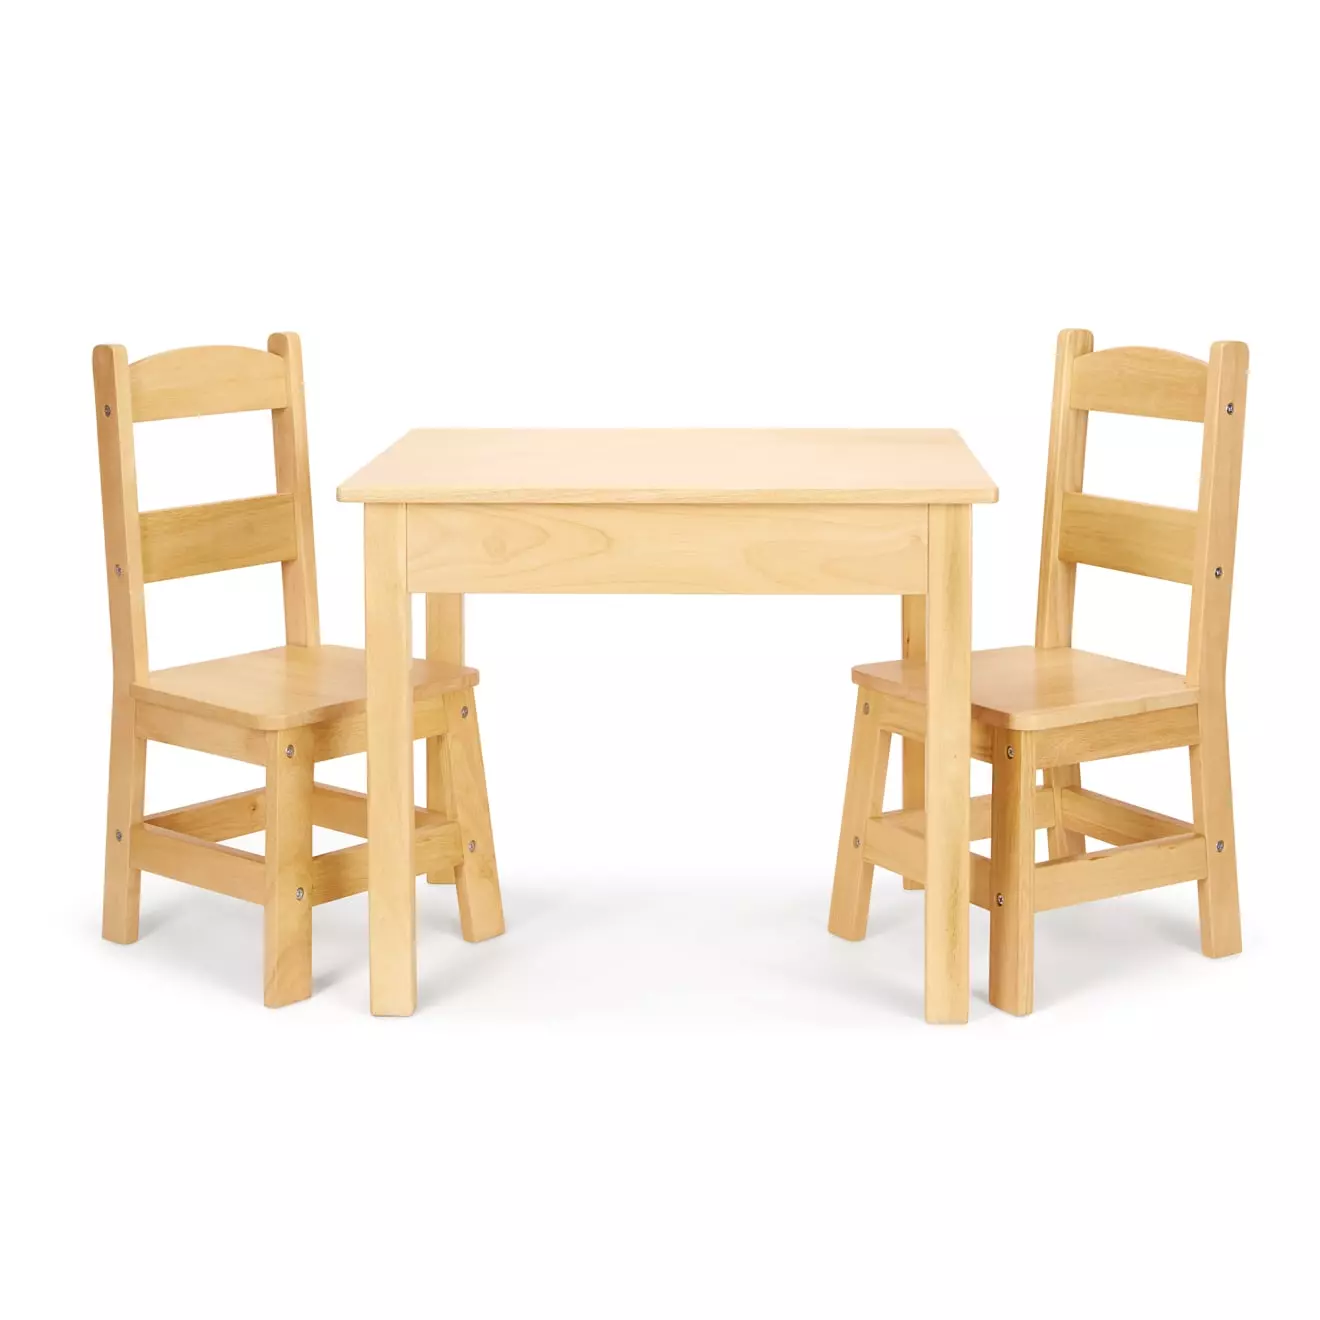 Melissa & Doug Wooden Table And 2 Chairs